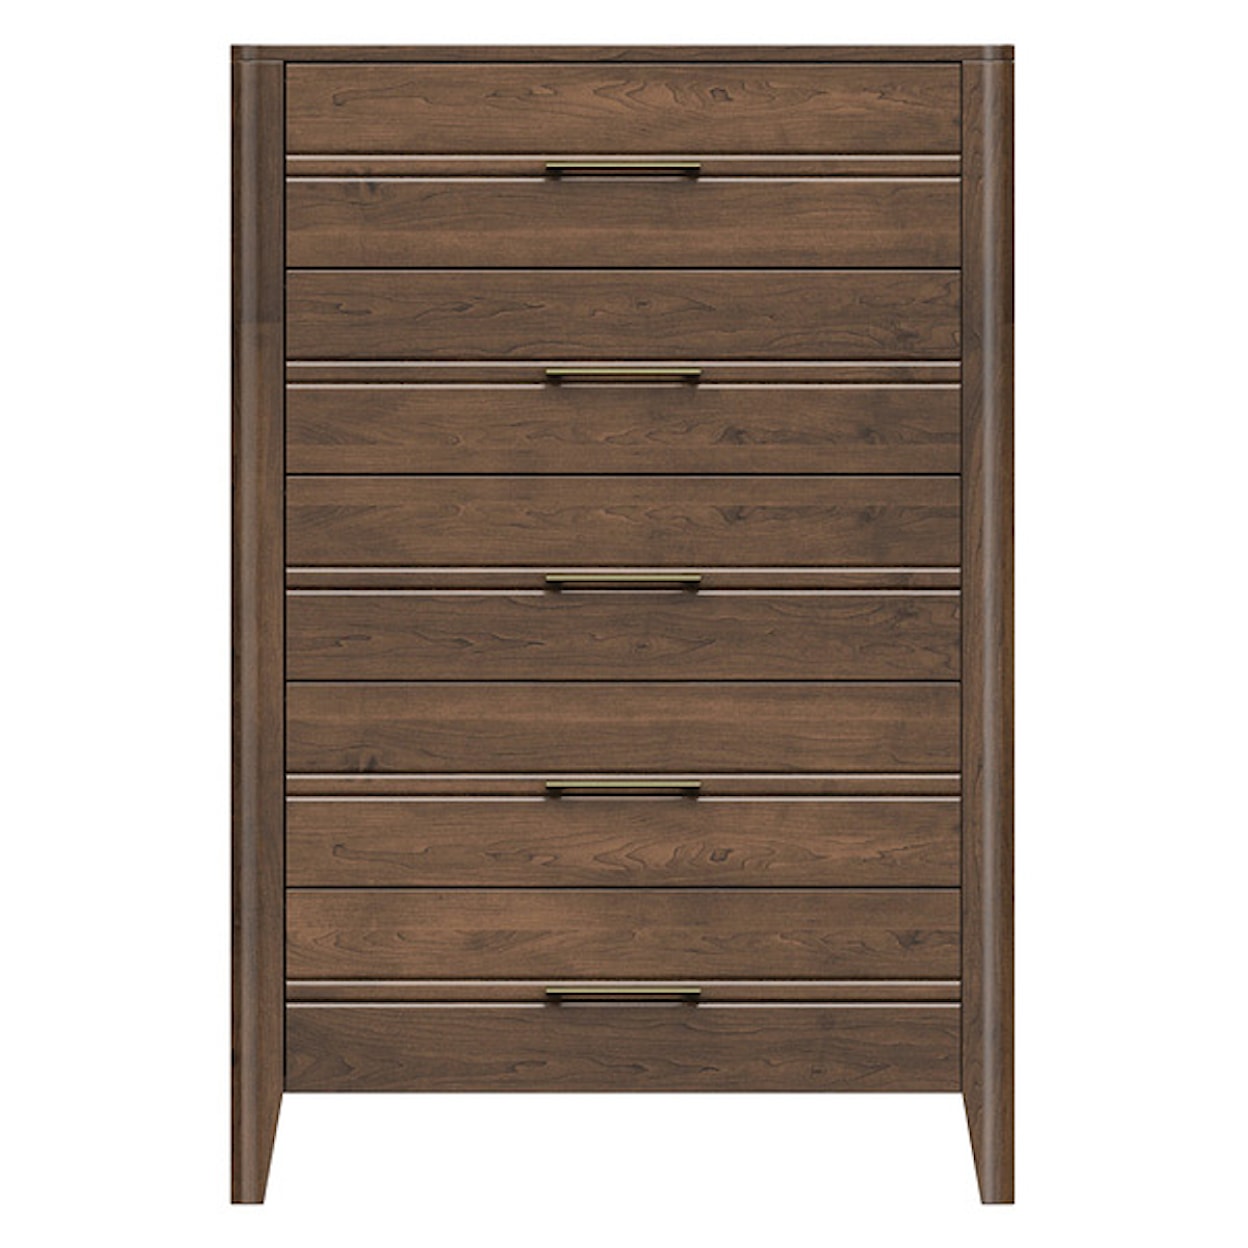 Country View Woodworking Westwood Bedroom Chest of Drawers